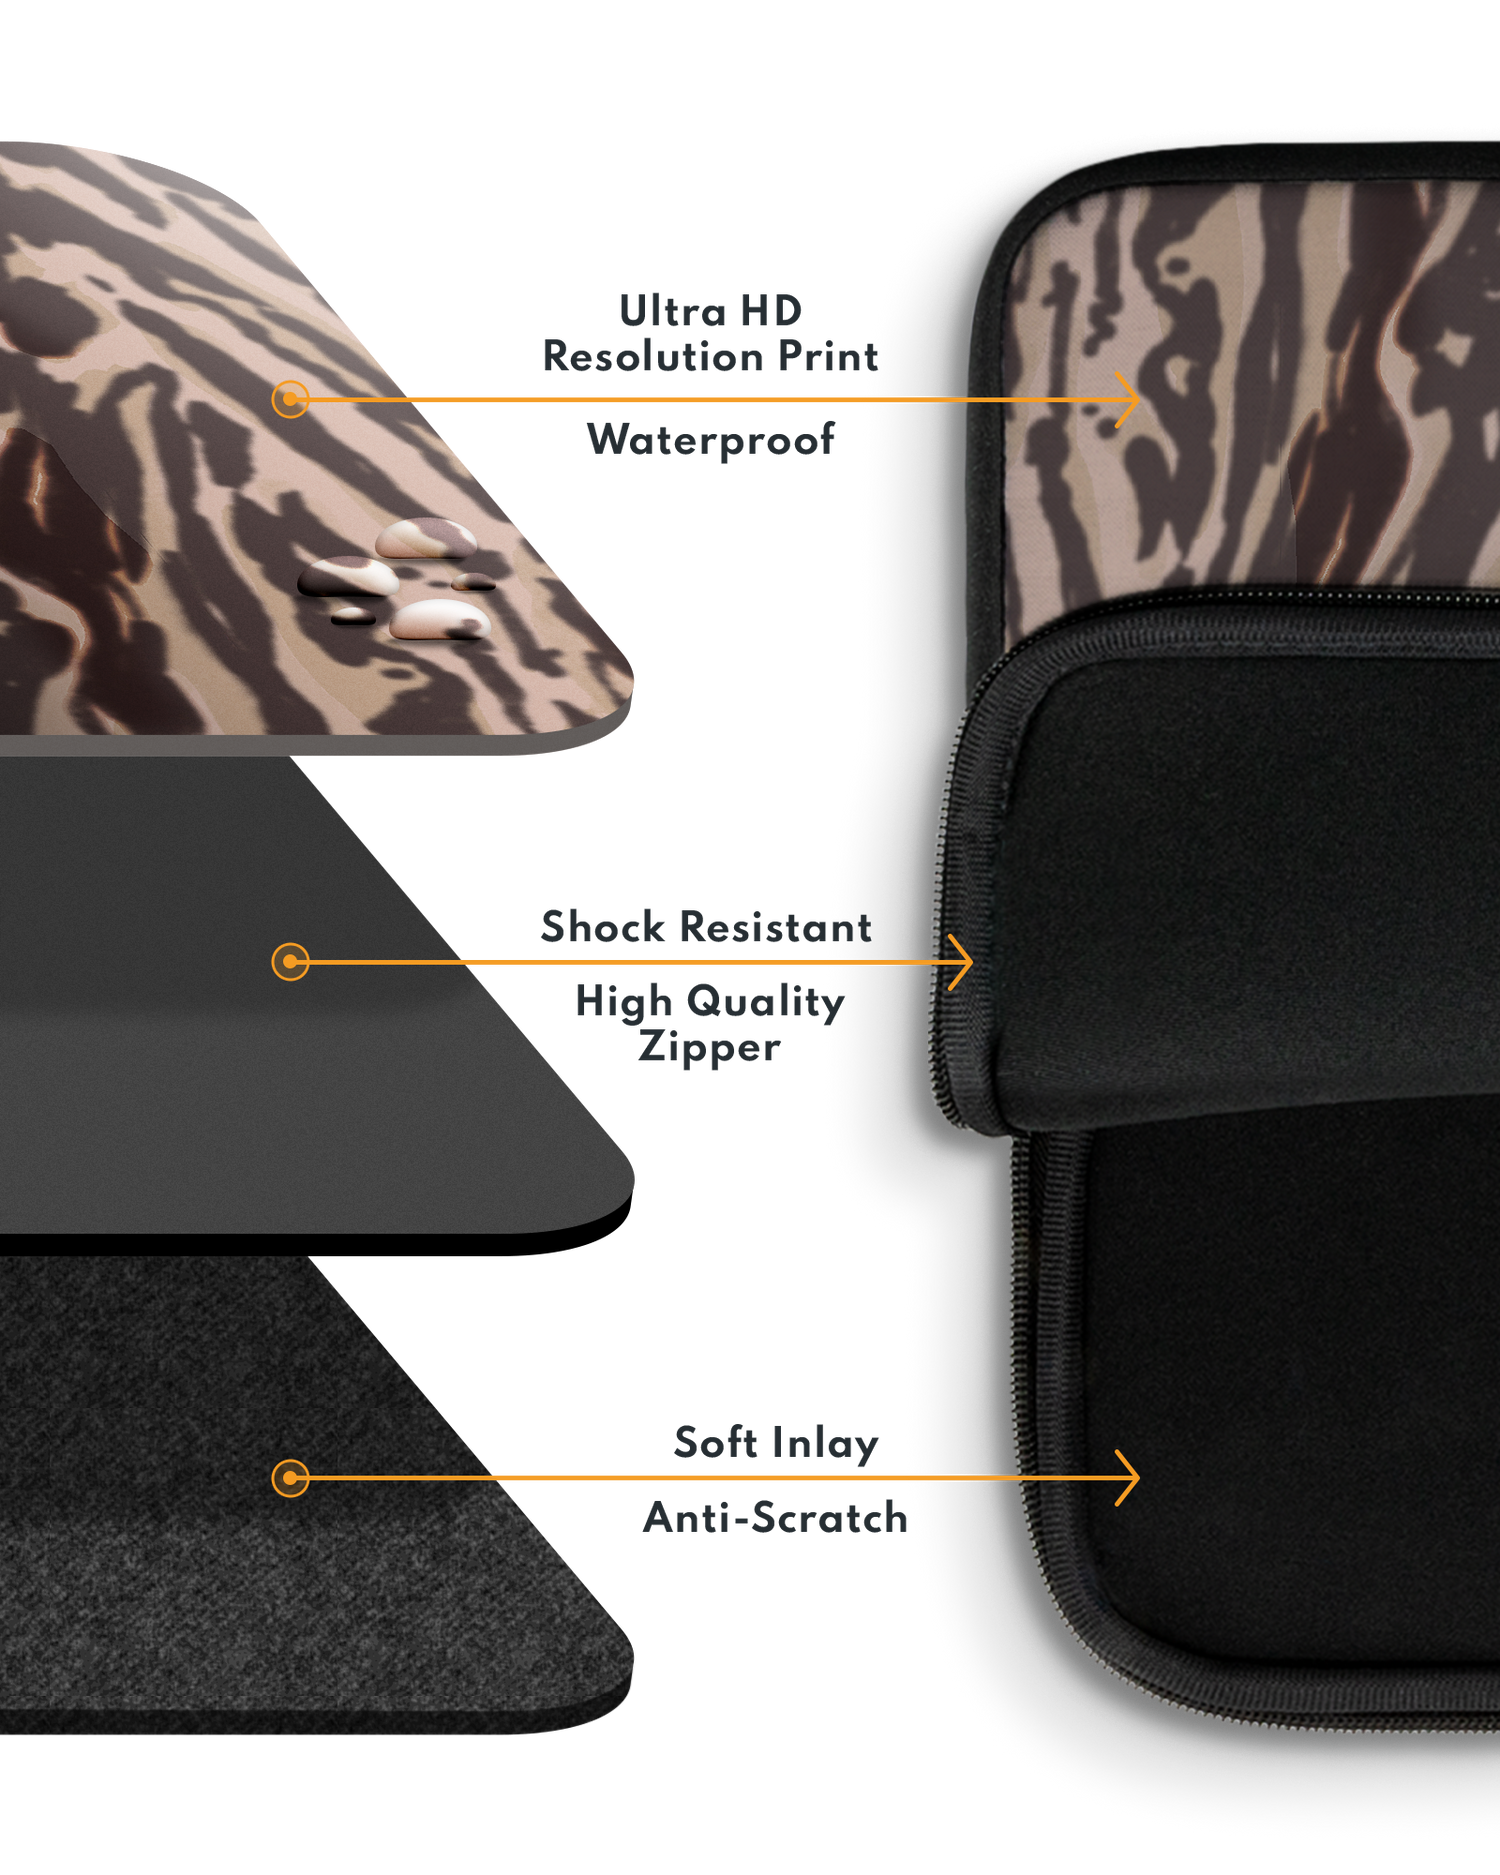 Animal Skin Tough Love Laptop Case 14-15 inch with soft inner lining